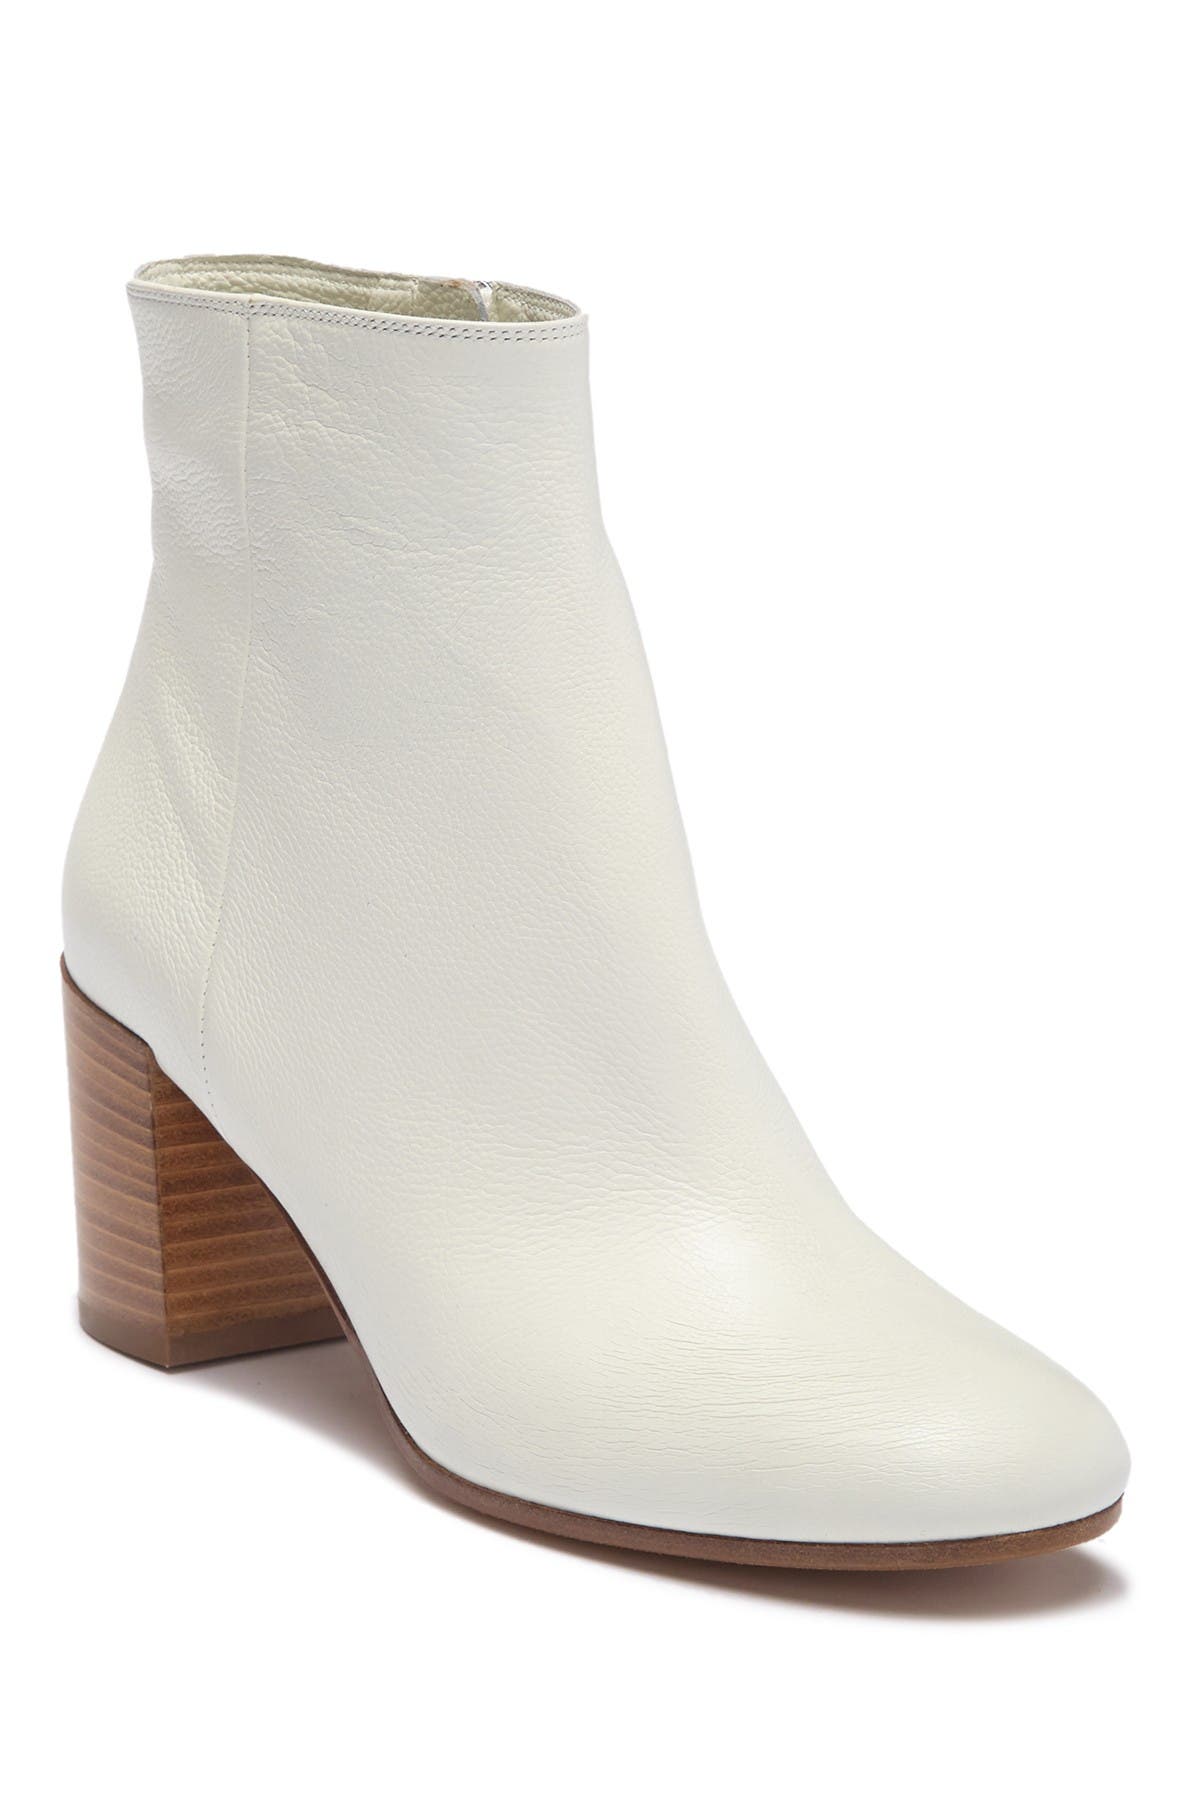 vince blakely boots white